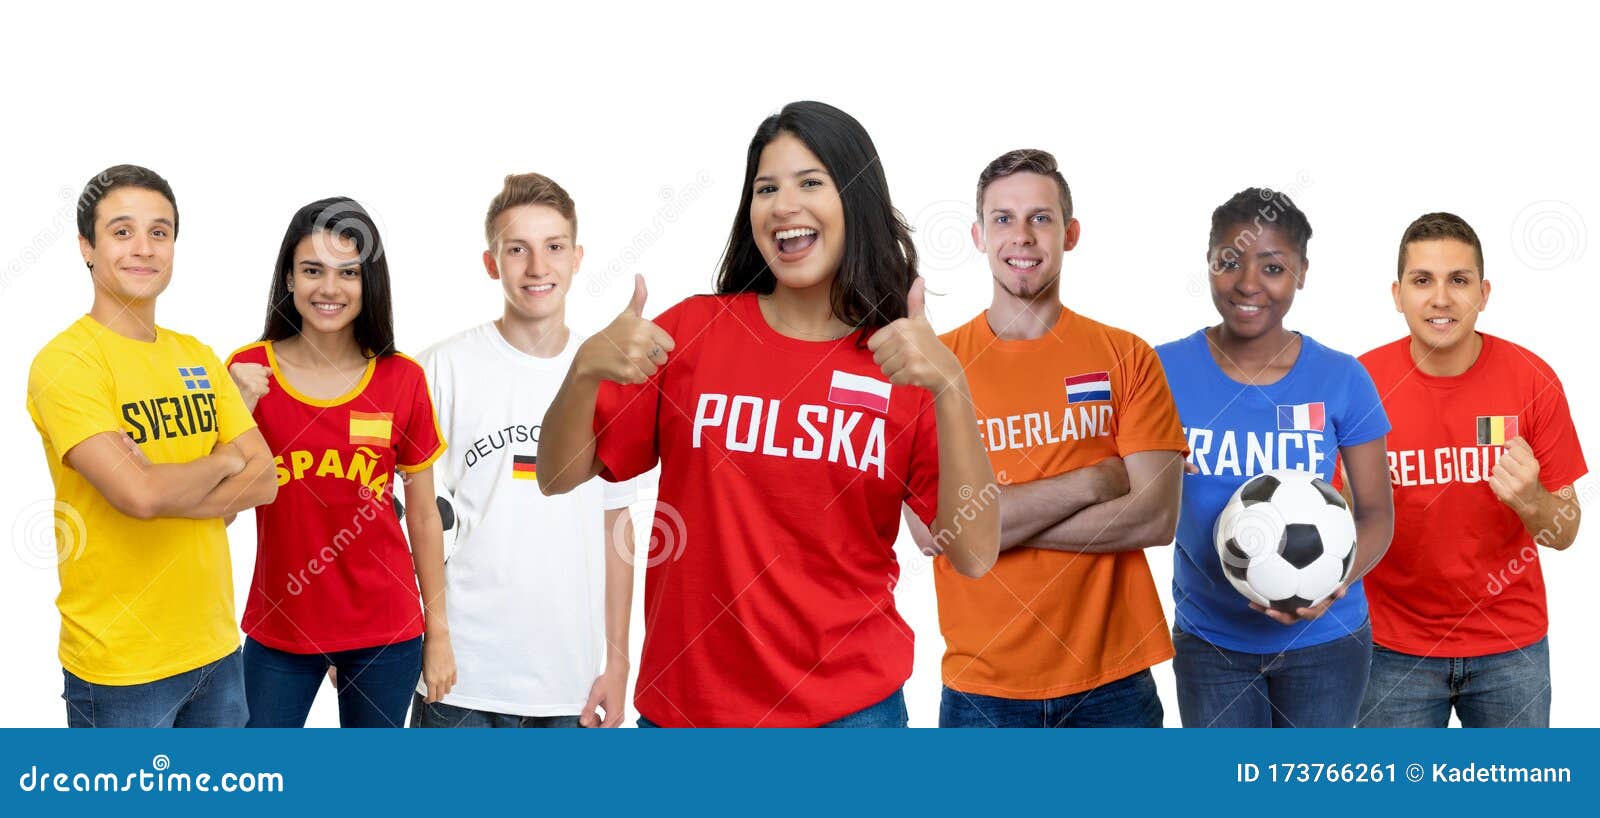 laughing soccer fan from poland with supporters from other european countries